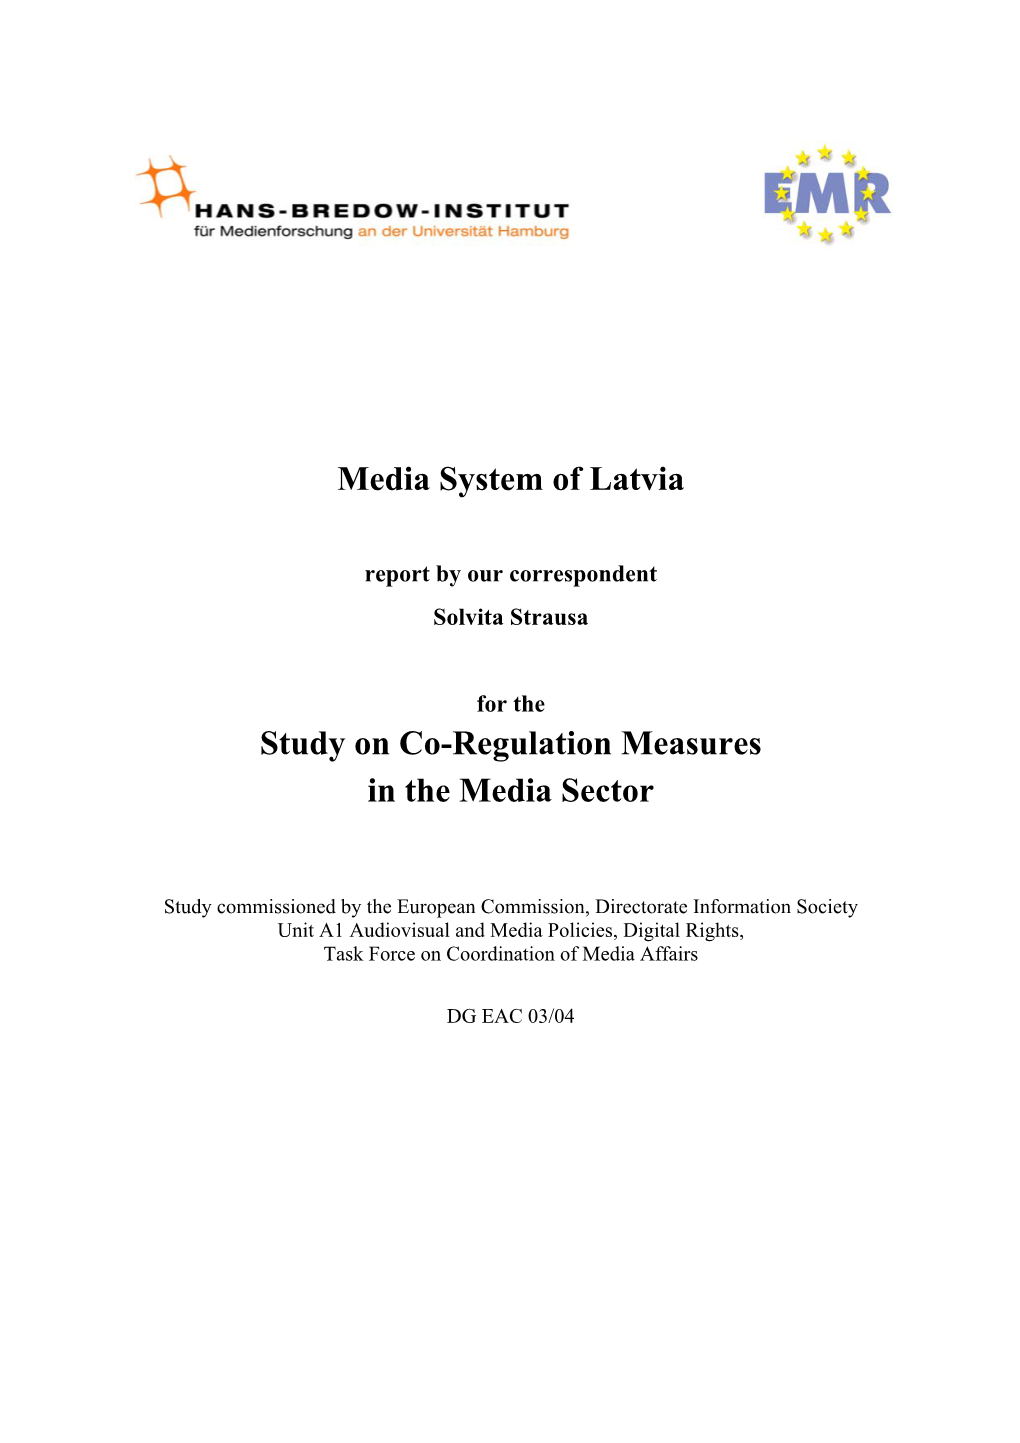 Media System of Latvia Study on Co-Regulation Measures in The